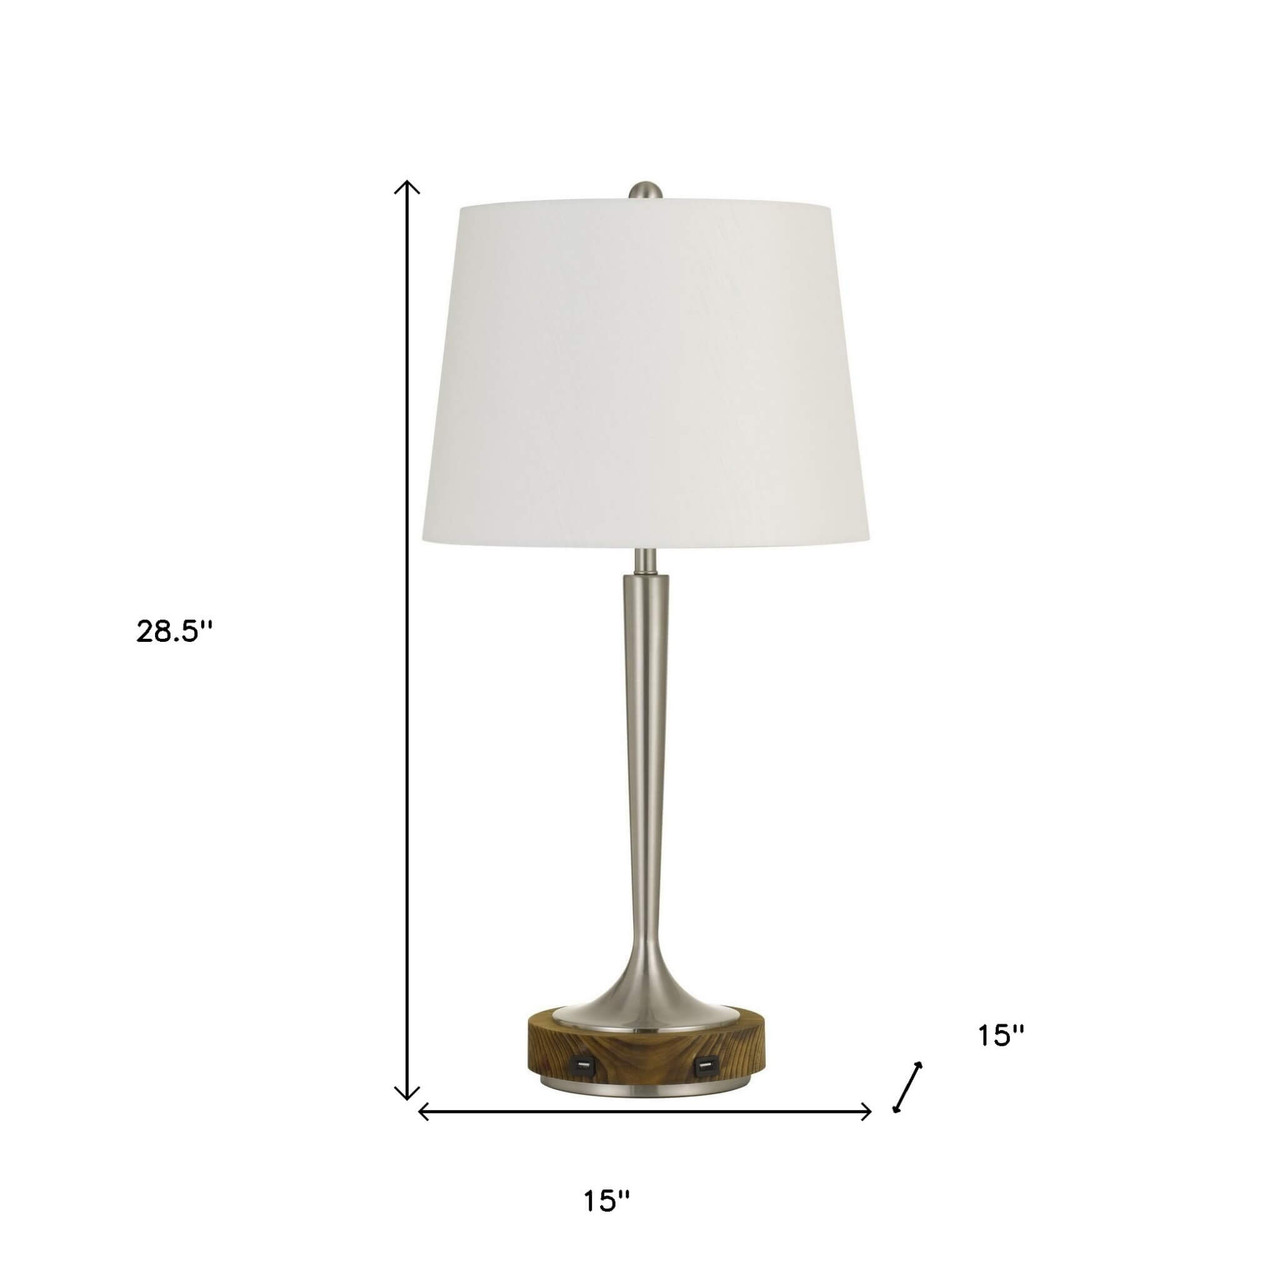 29" Nickel Metal Usb Table Lamp With Off White Empire Shade